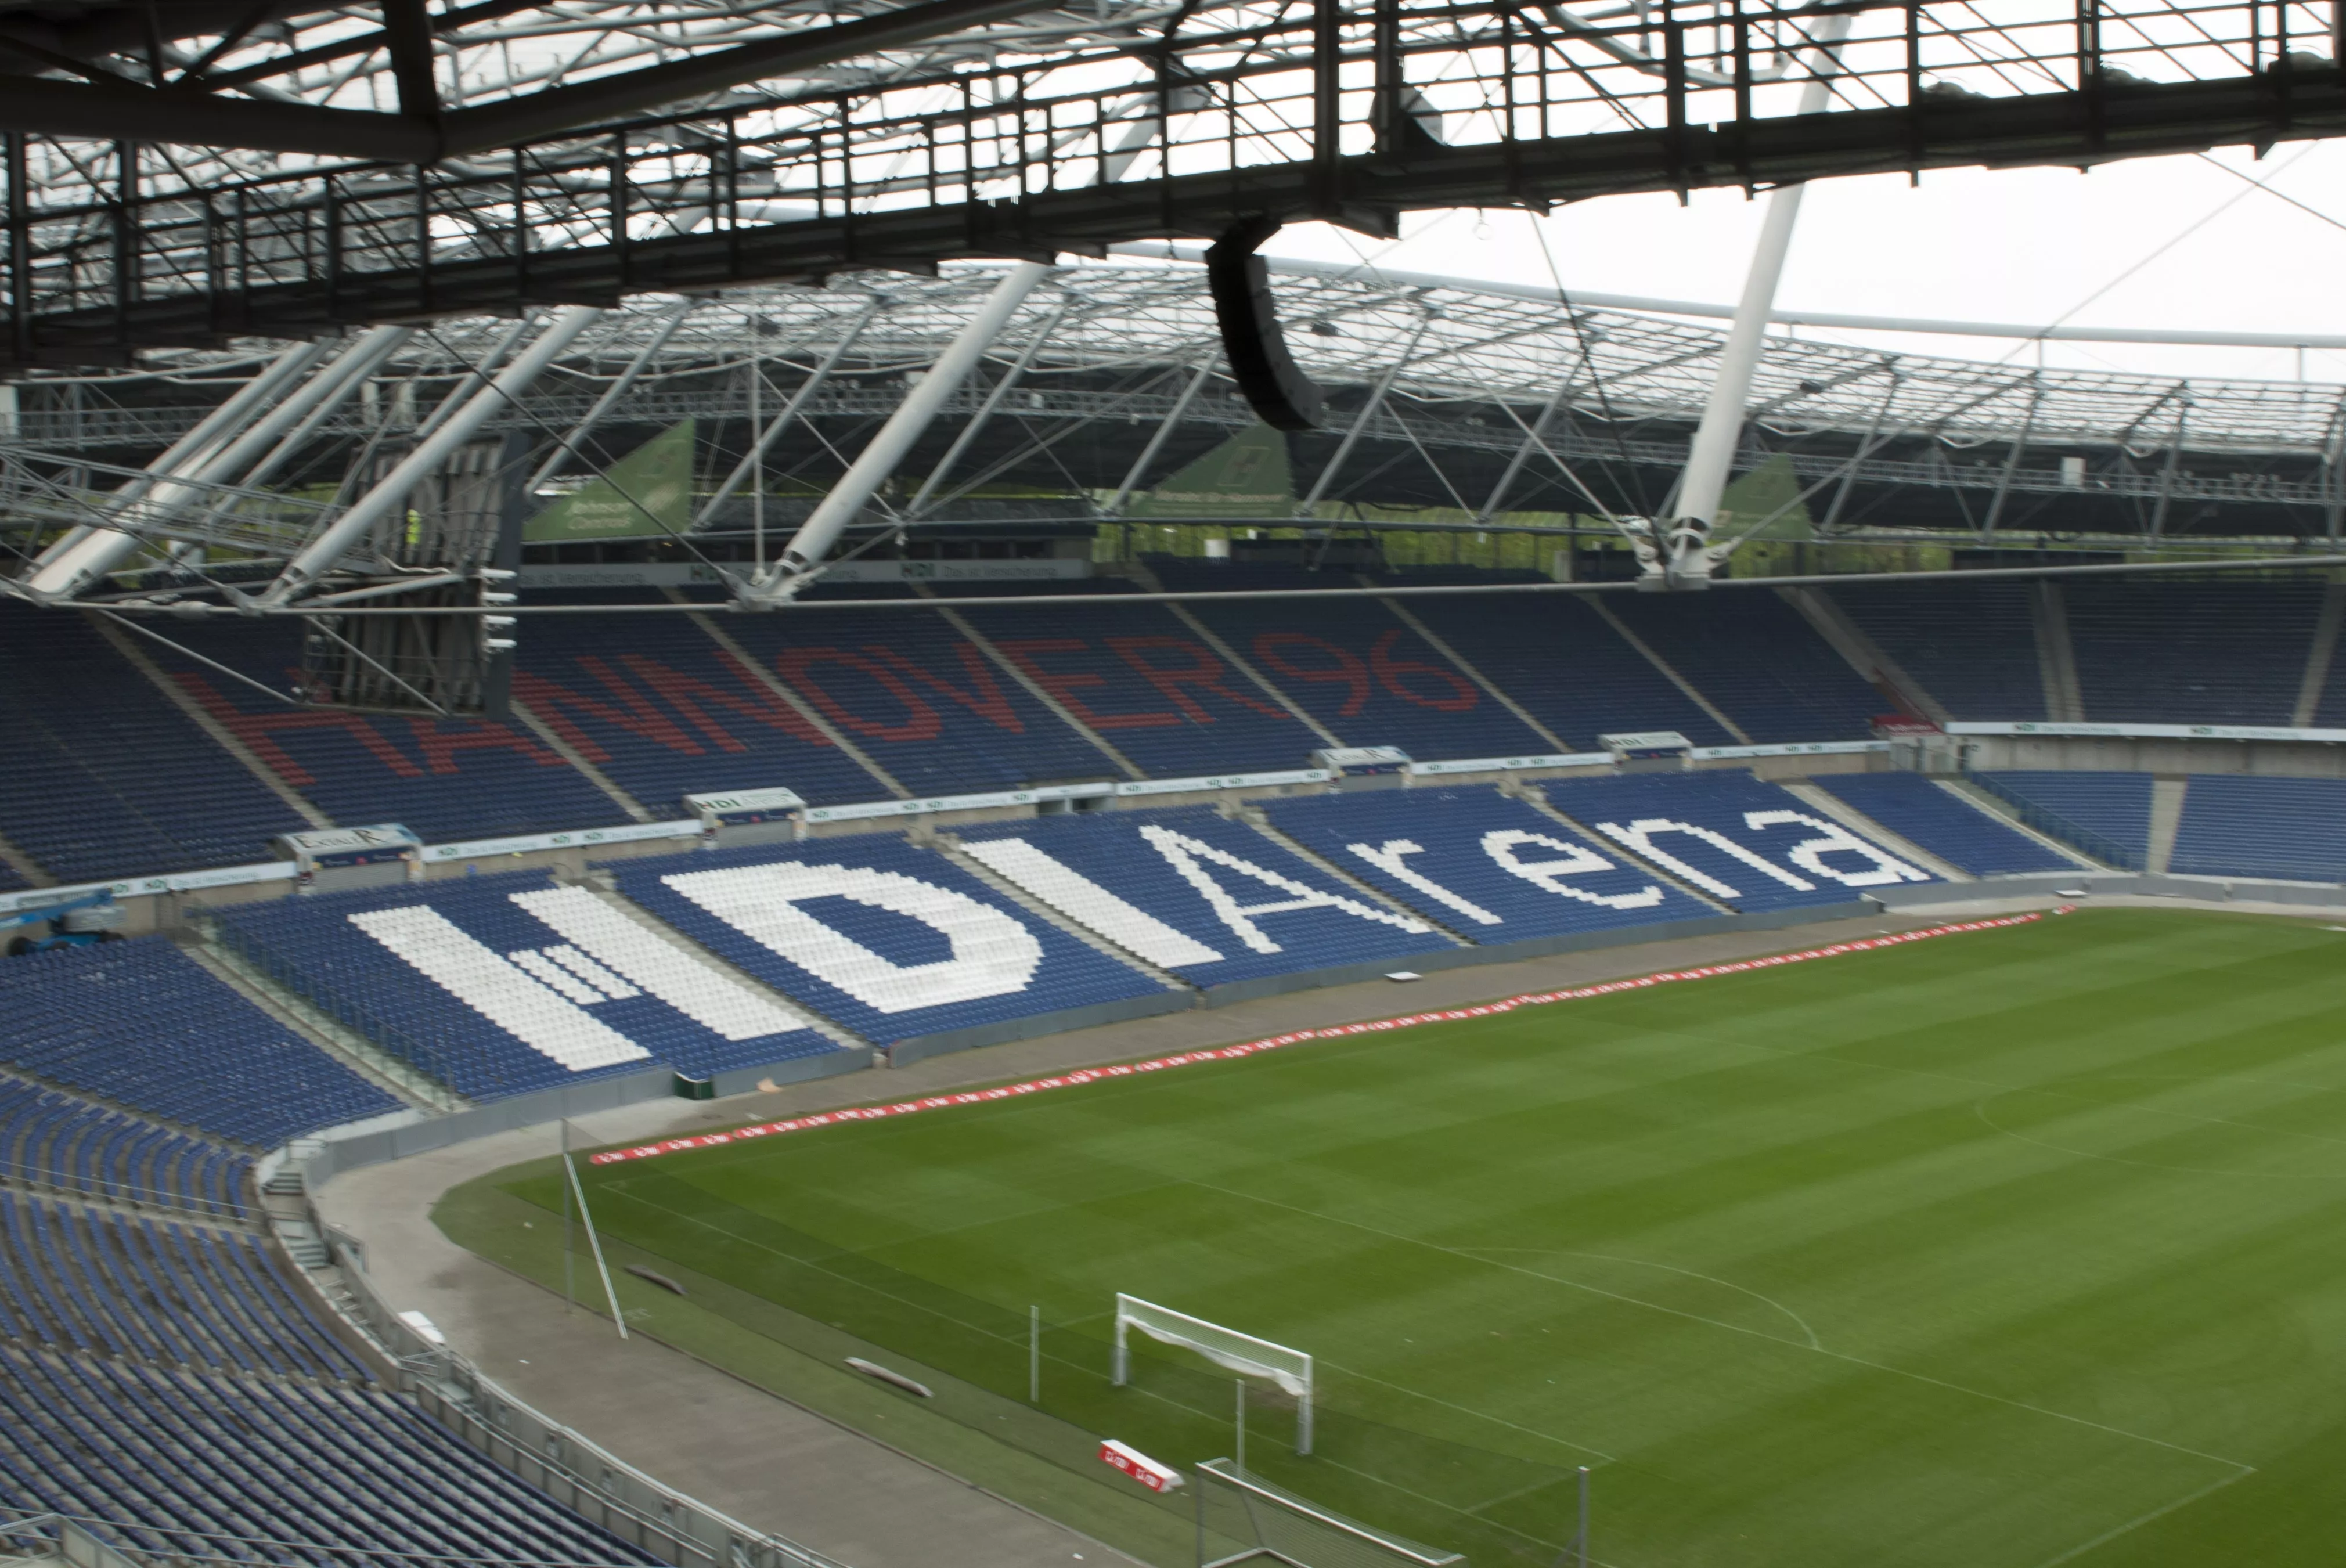 HDI-Arena in Germany, Europe | Football - Rated 3.8